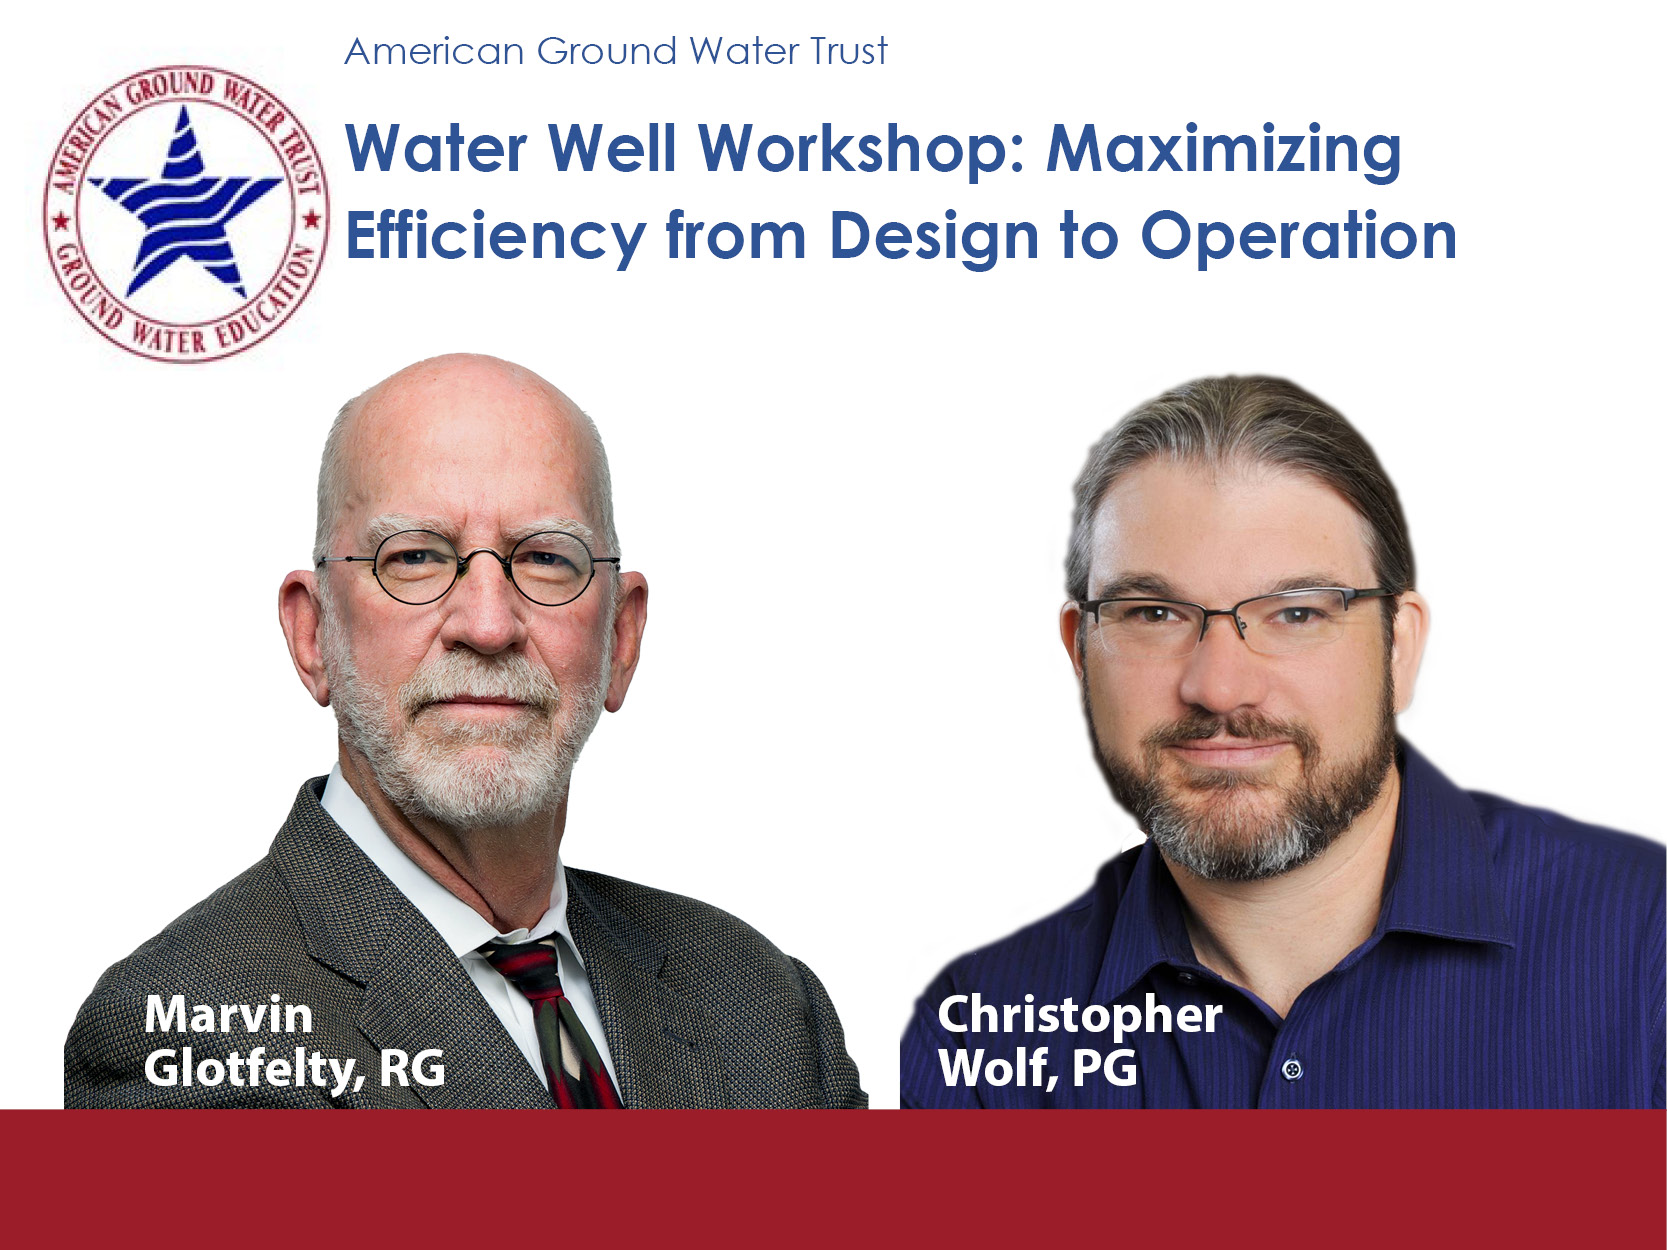 Presenting at AGWT Water Well Workshop